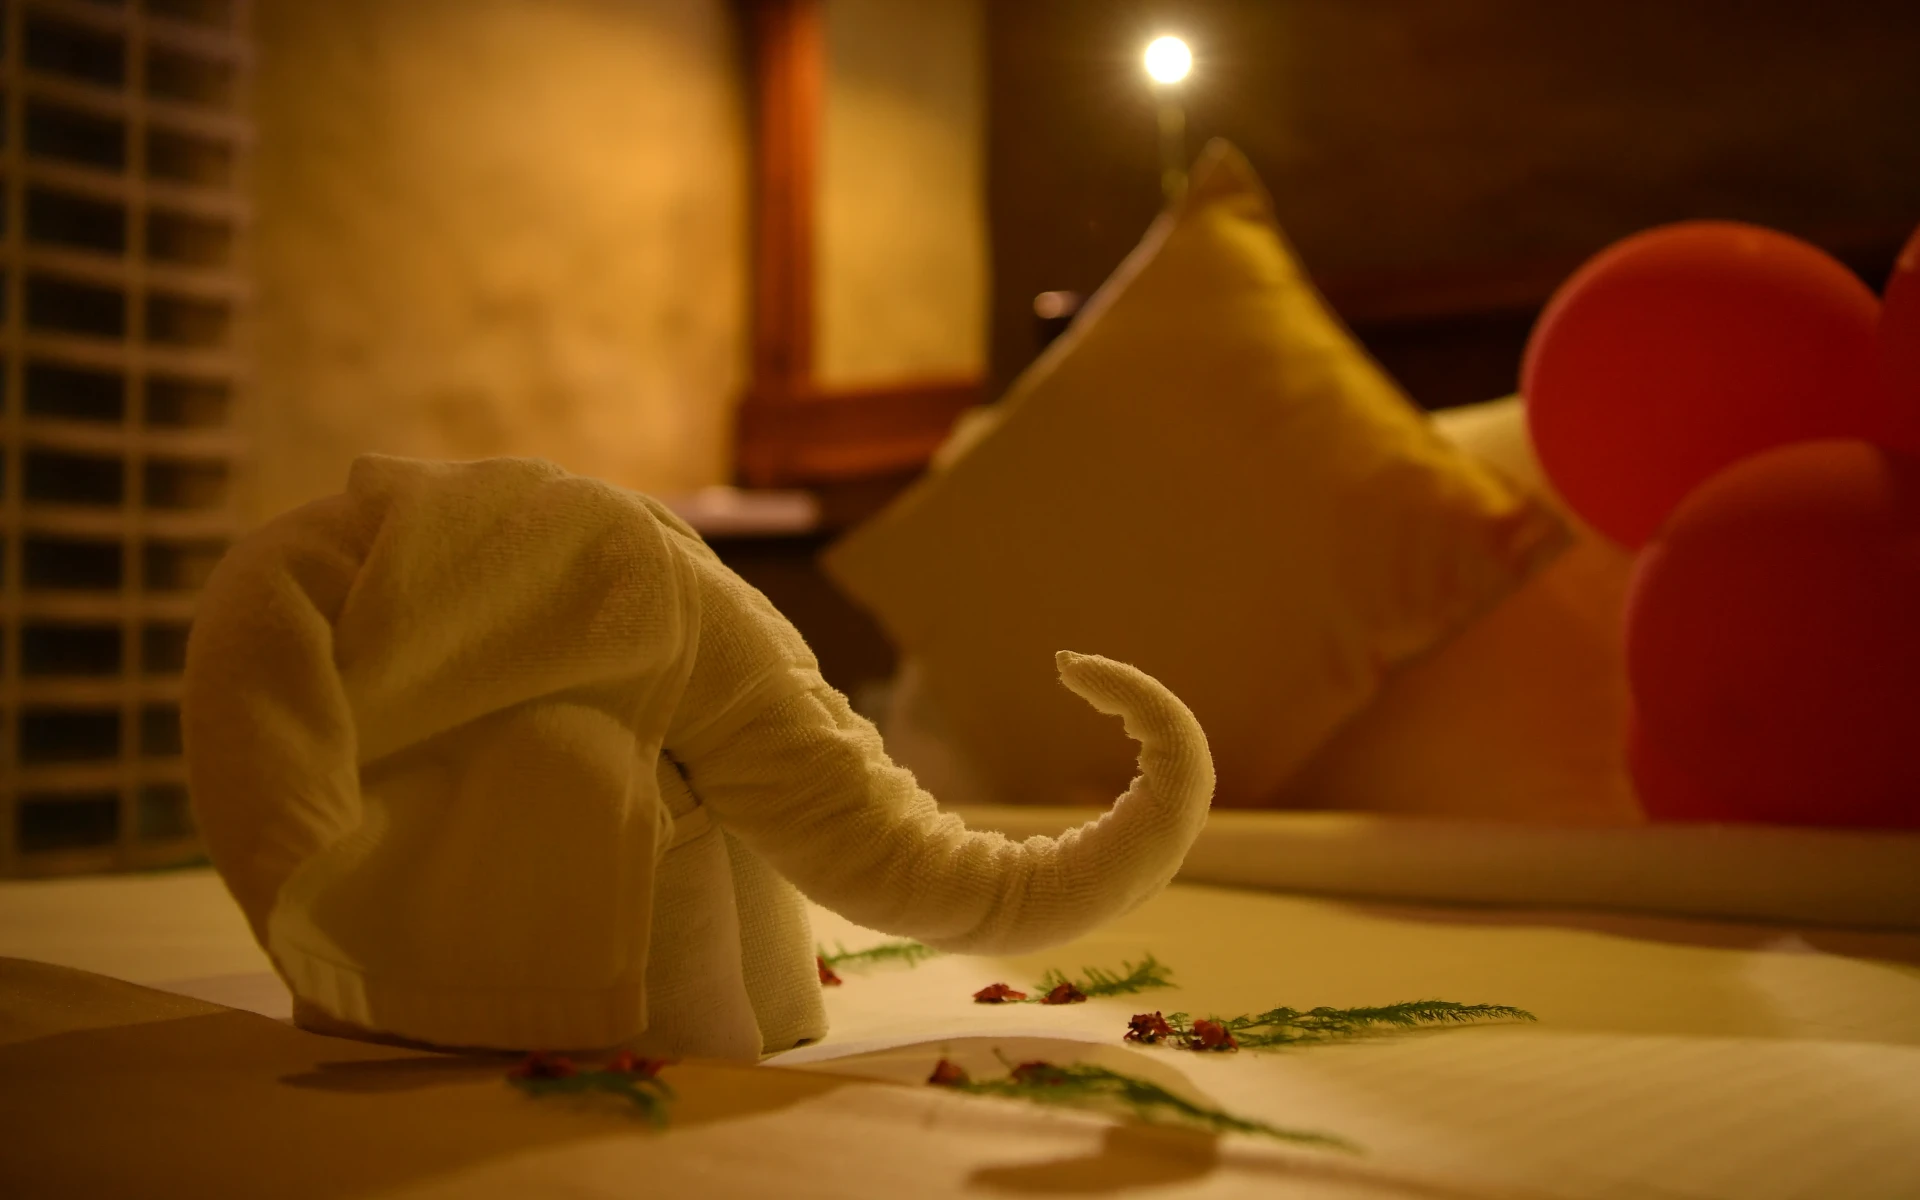 An adorable towel origami elephant sits on  double bed in a warmly-lit room.